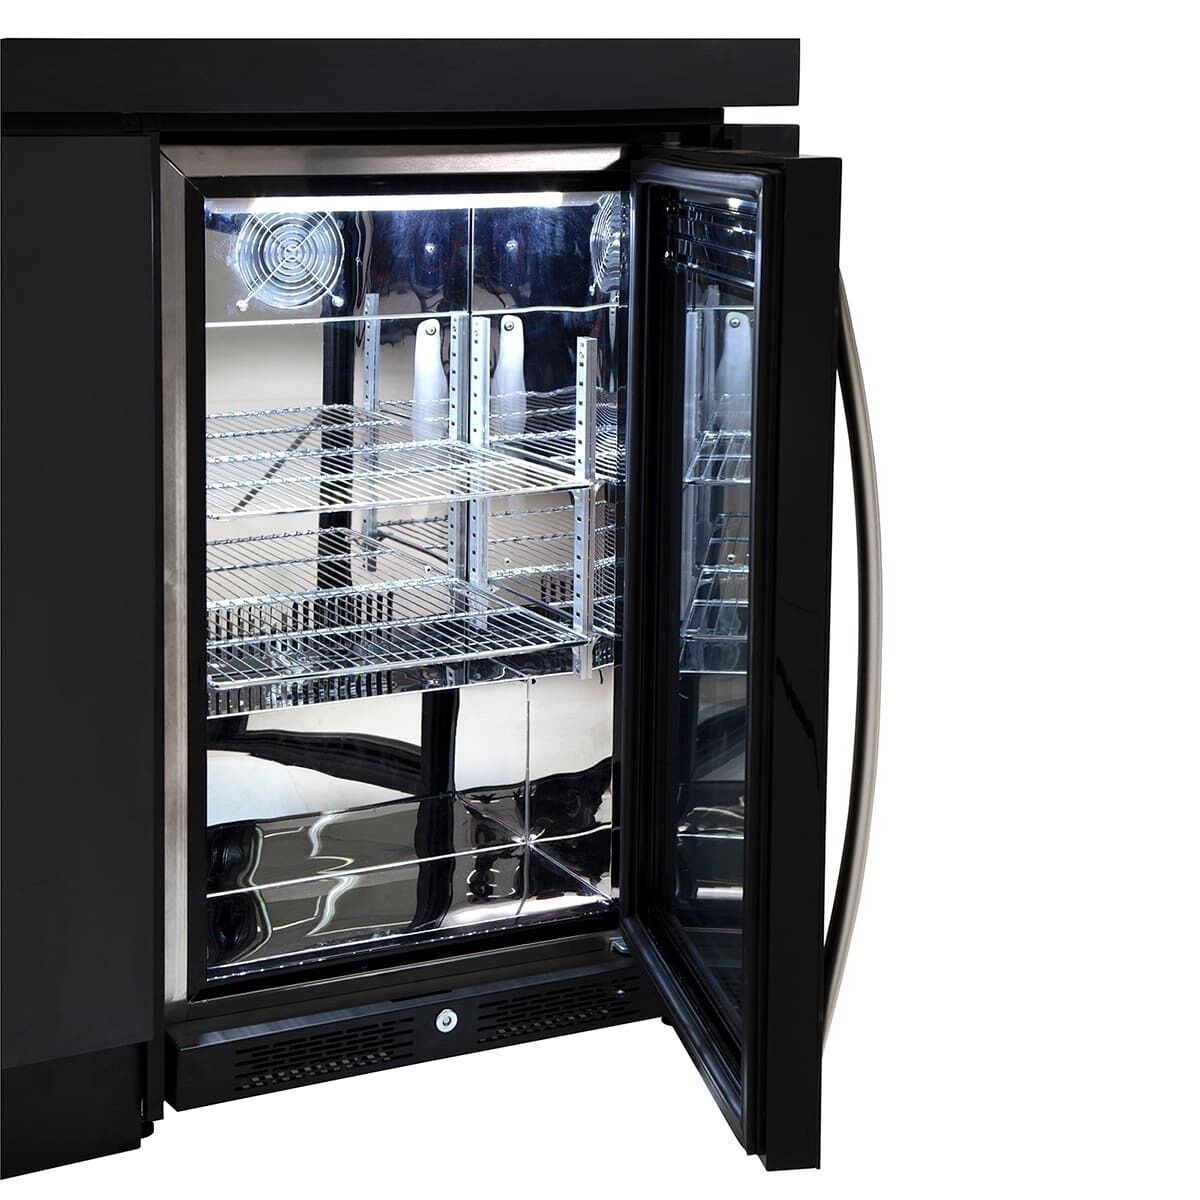 Beefeater Cabinex  - 3000E Series 5 Burner Classic Outdoor Kitchen - Black product image